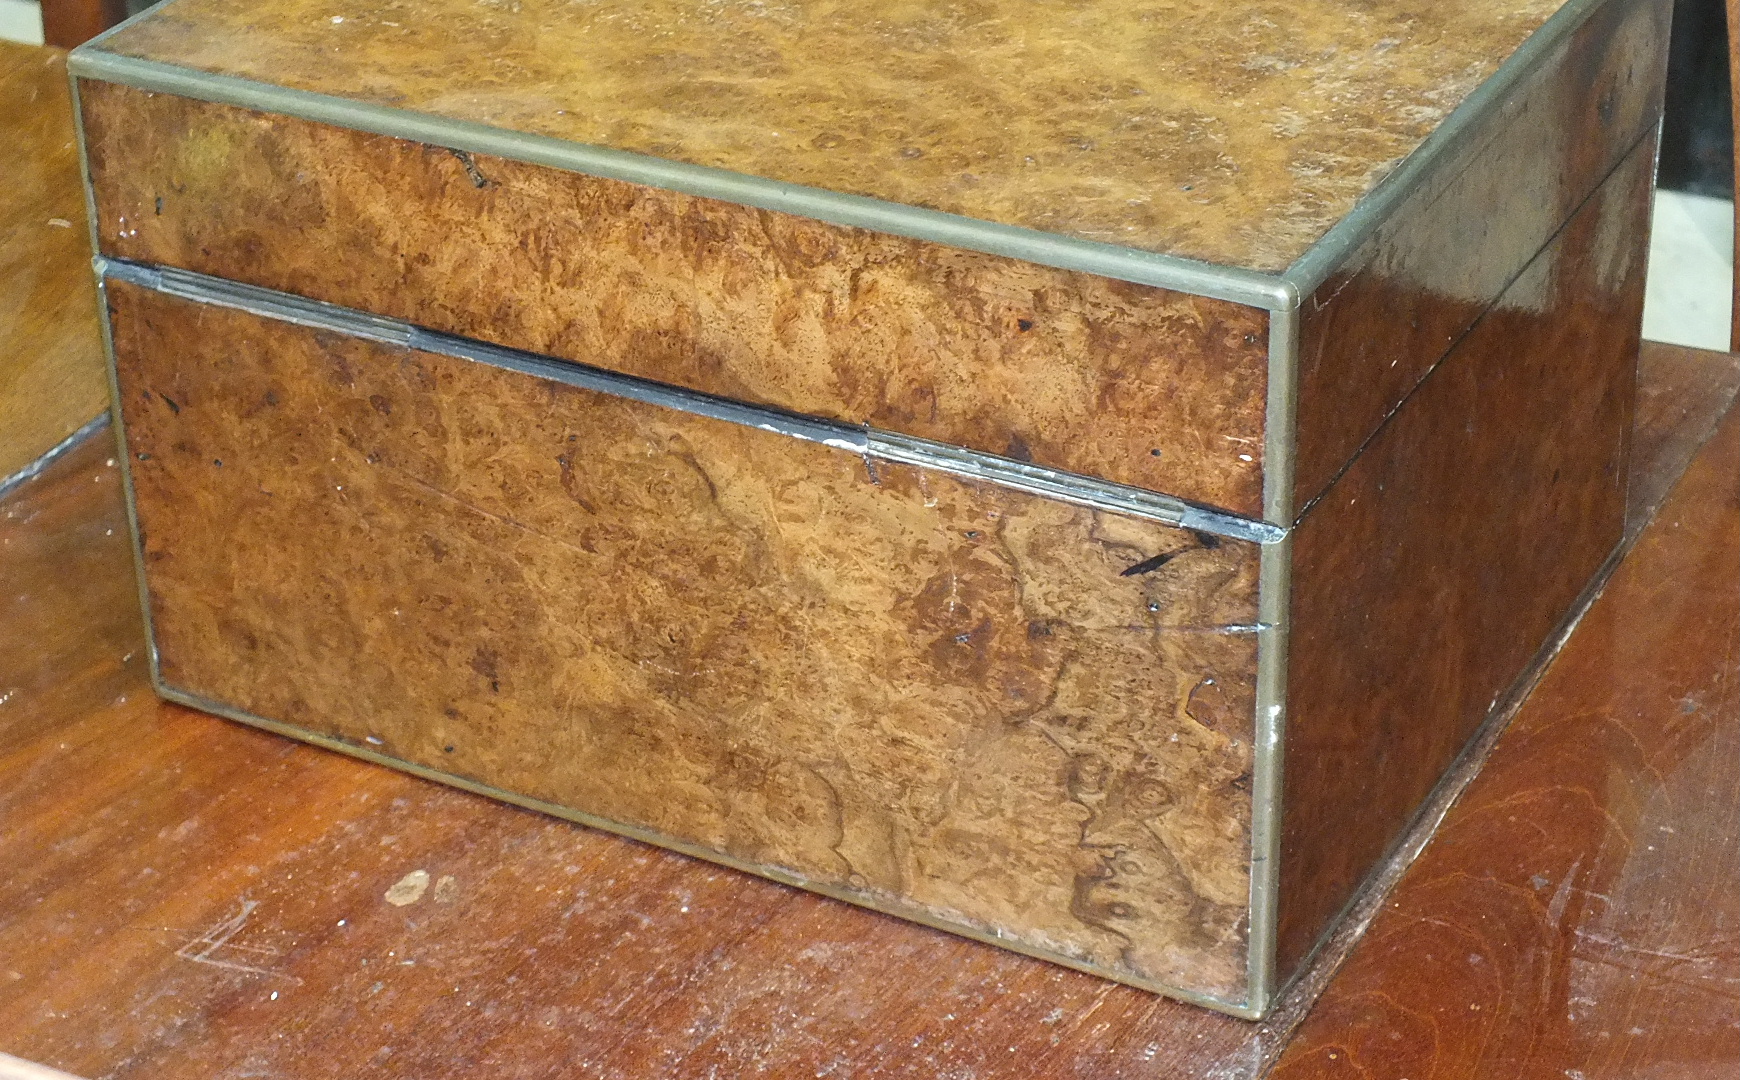 A late-Victorian brass-bound burr walnut jewellery box with hinged lid opening to reveal an interior - Image 6 of 9